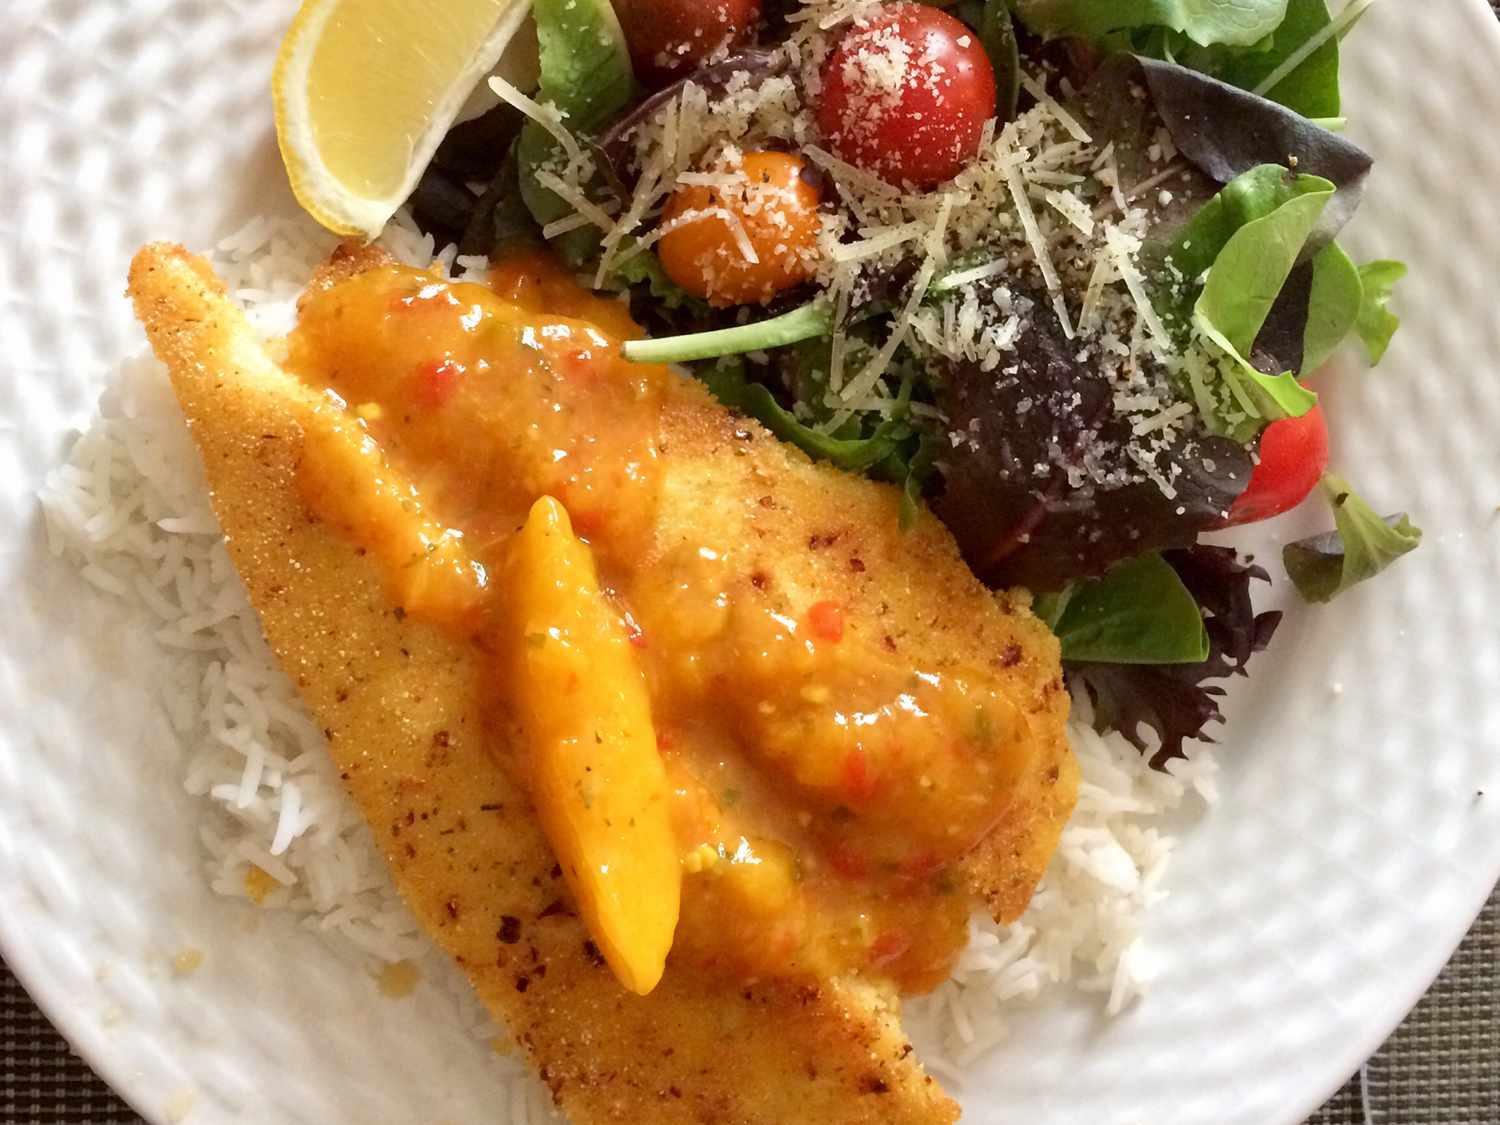 Close up view of a Pan-Fried Swai Fillet with peach sauce on white rice, served with salad topped with cheese and lemon wedge on a white plate